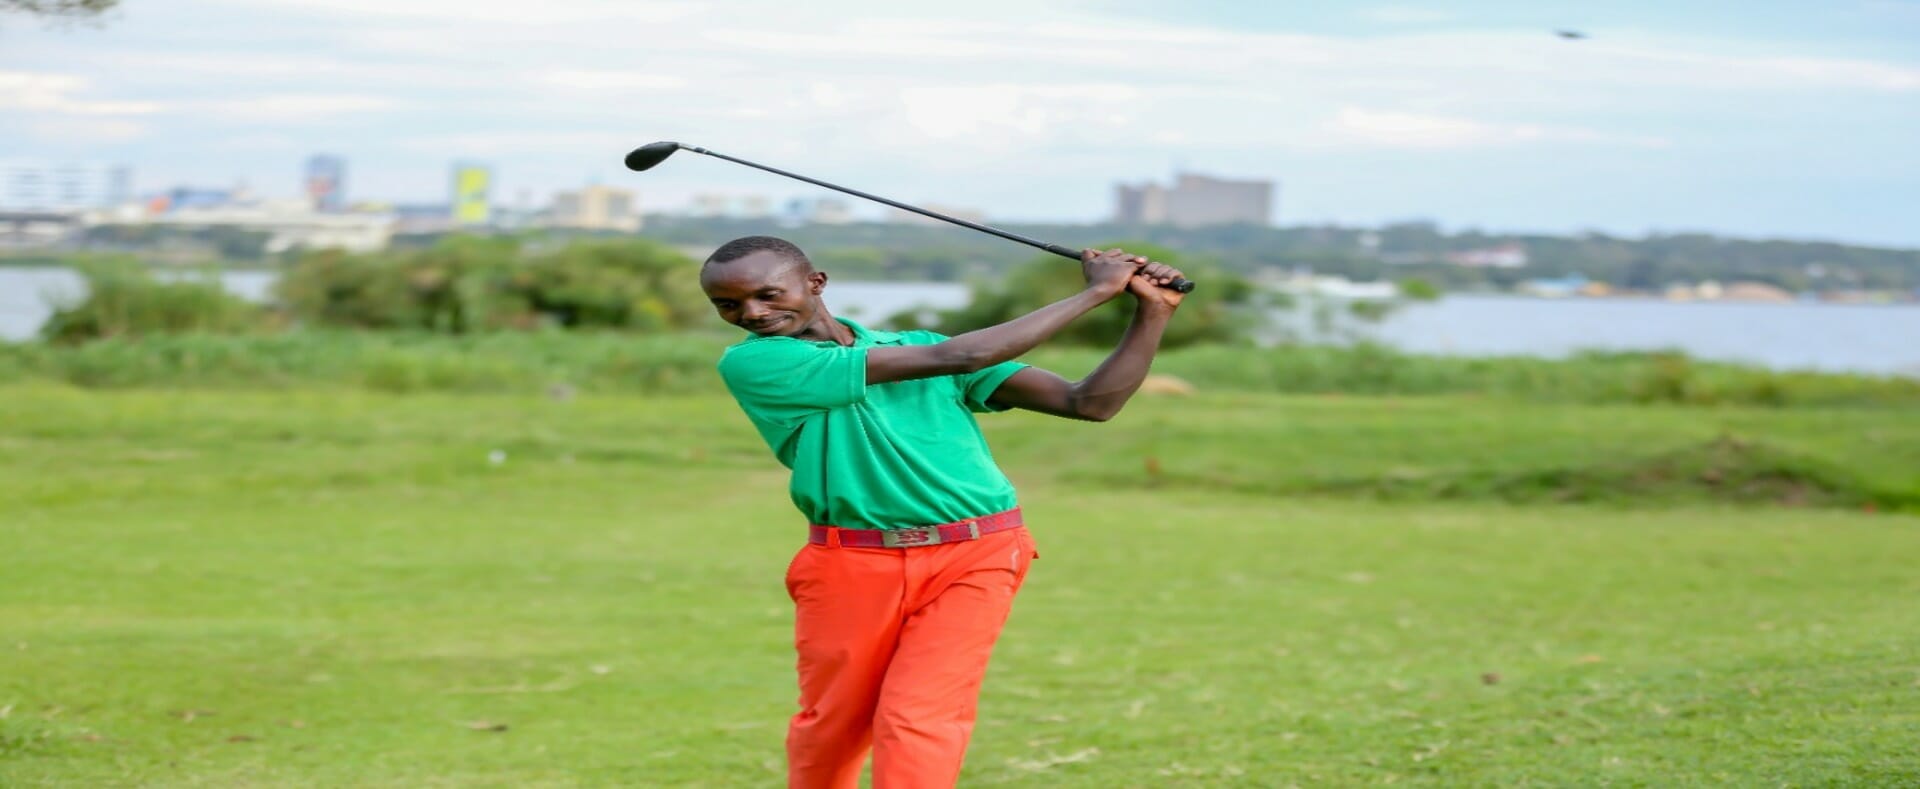 How Safaricom’s golf tour in Nyanza has demonstrated Kenya’s golfing power and spirit among women and upcoming junior golfers.